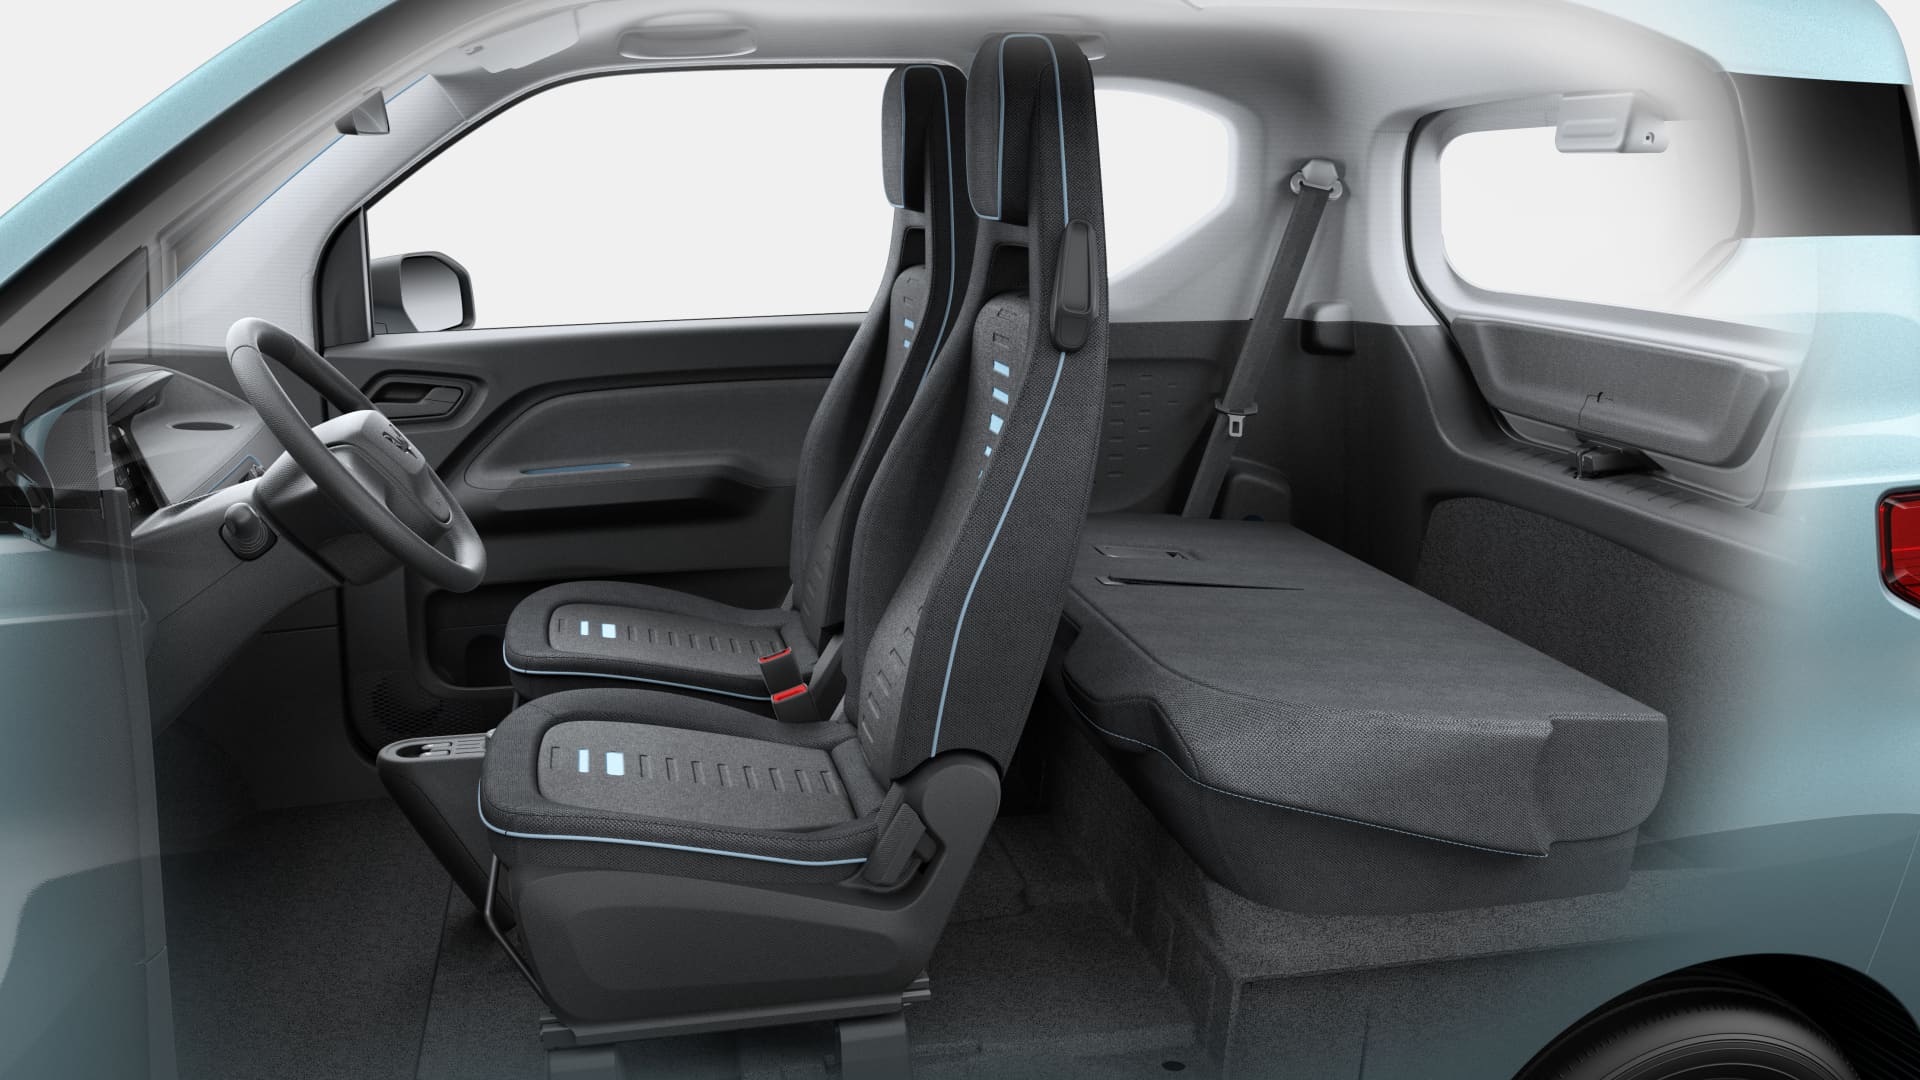 A side view of the interior of Wuling's mini electric hatchback.